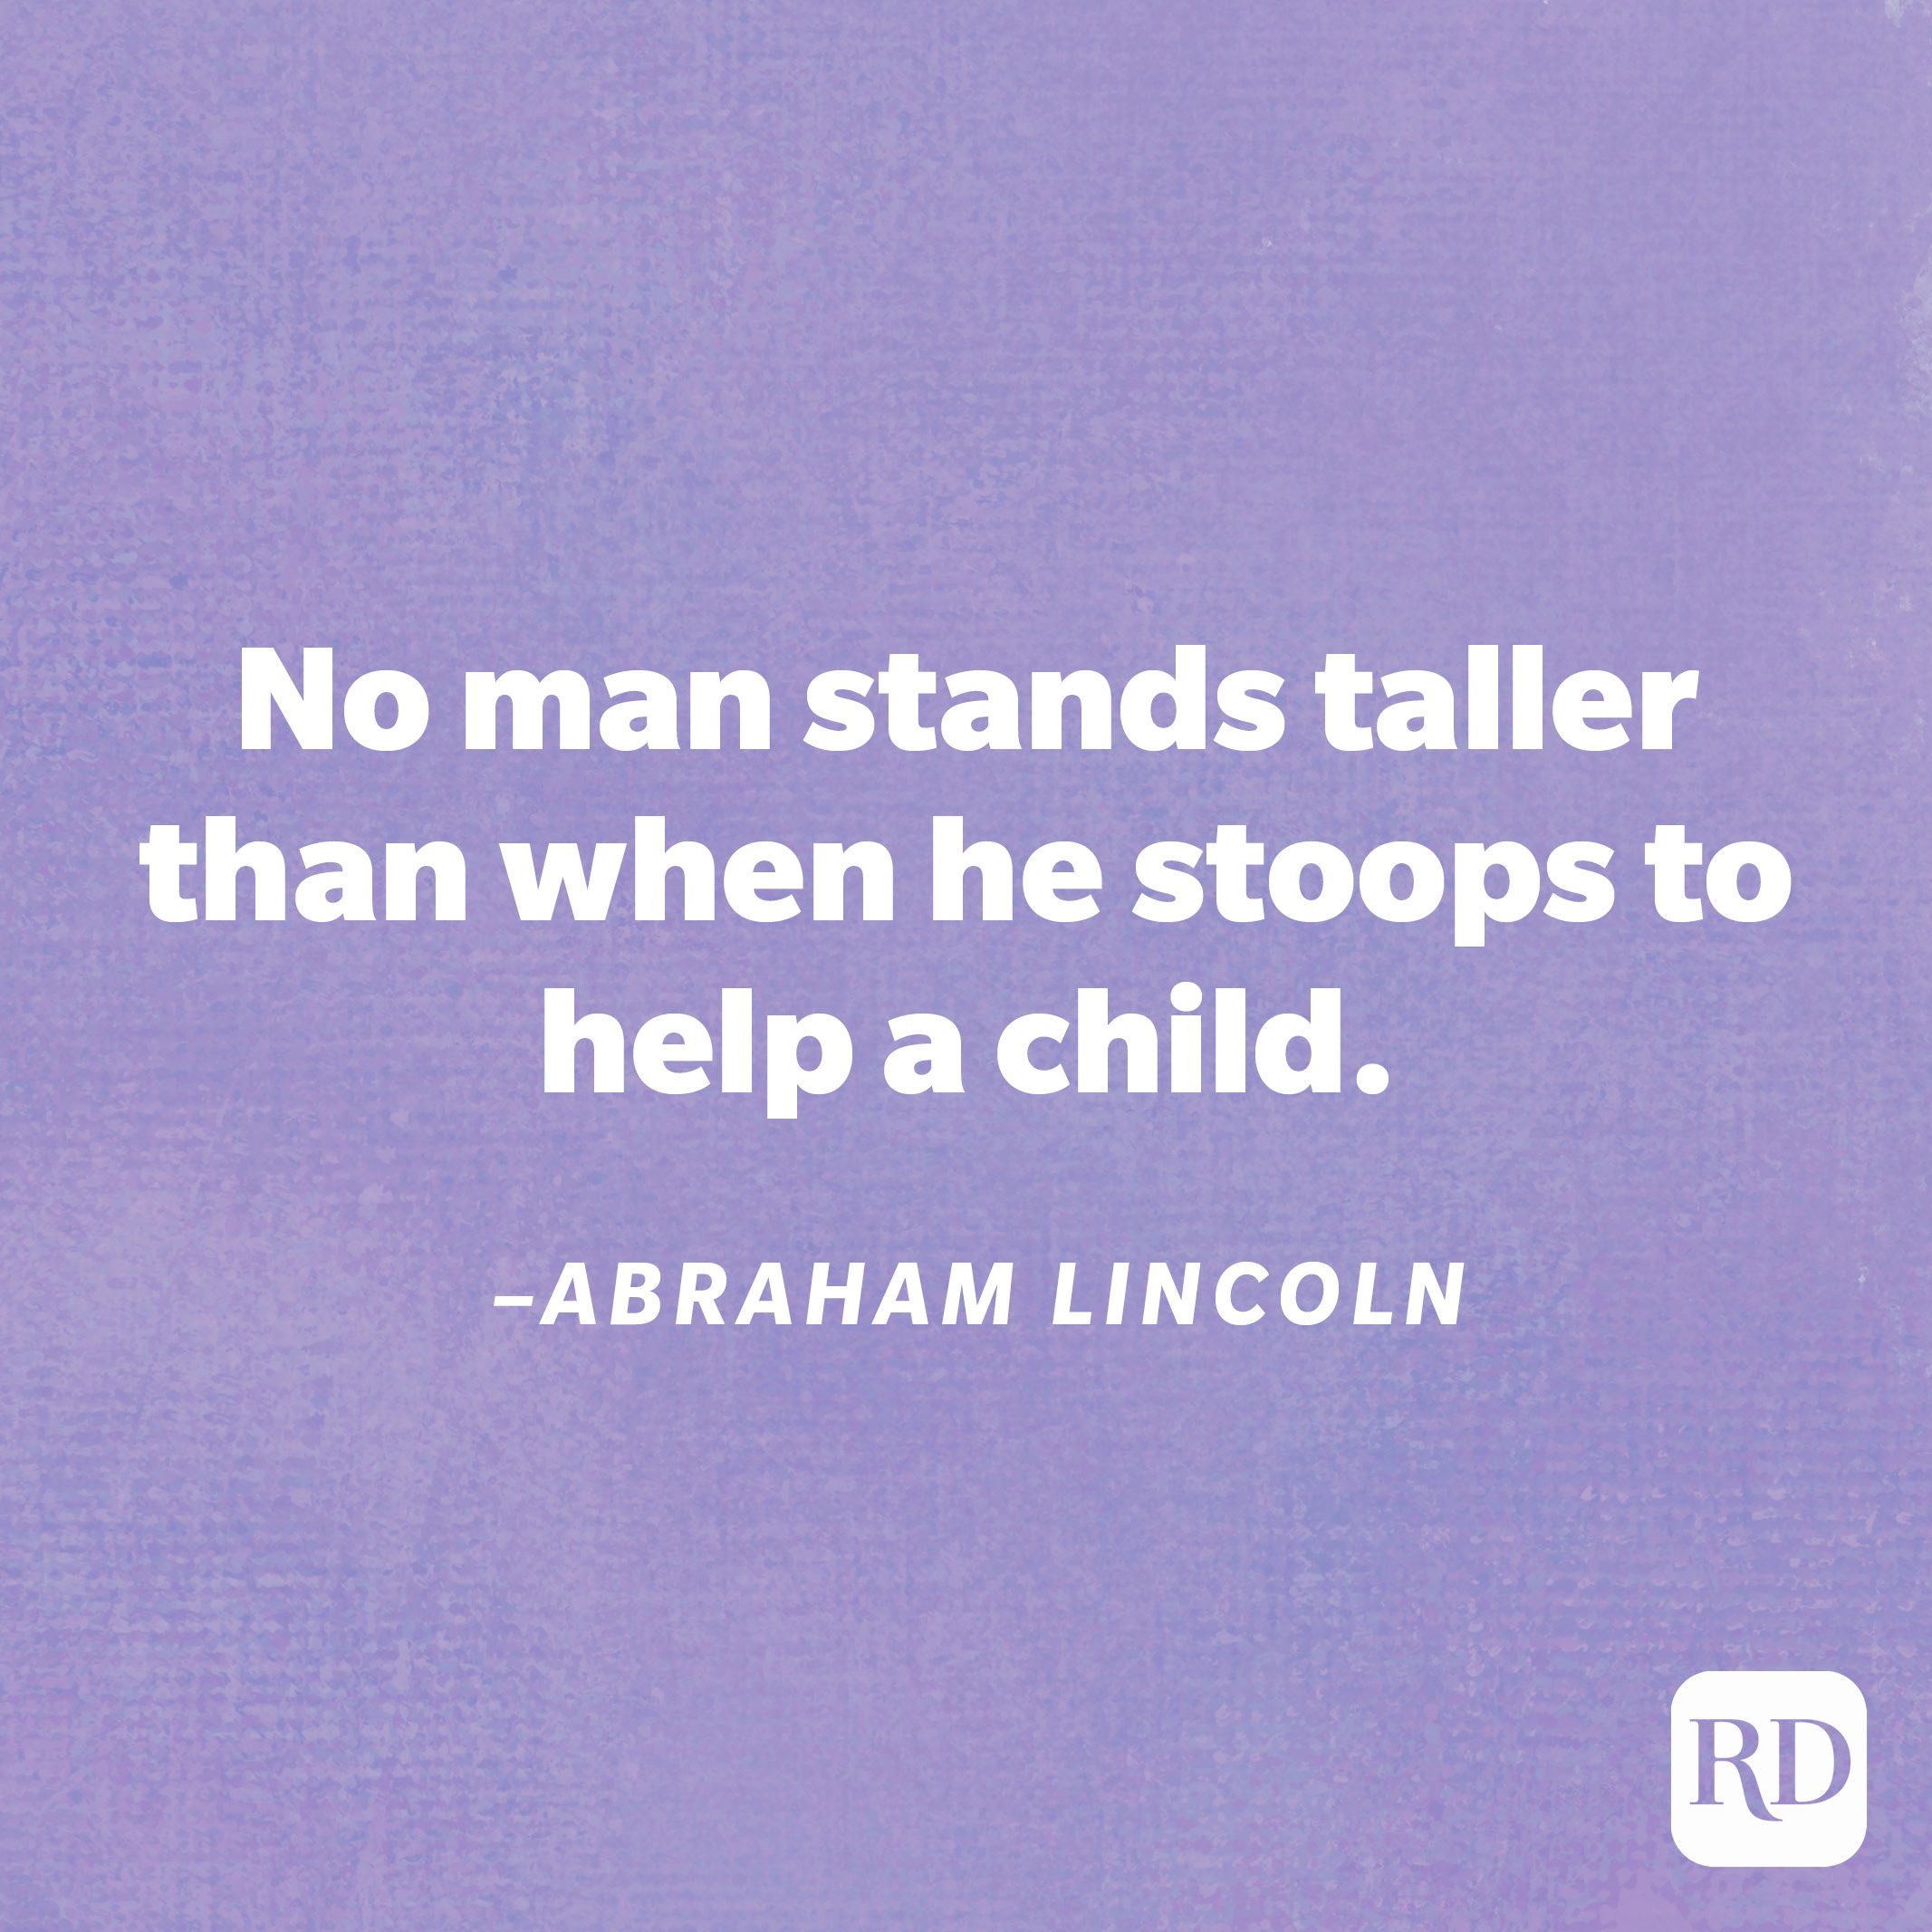 "No man stands taller than when he stoops to help a child."—Abraham Lincoln